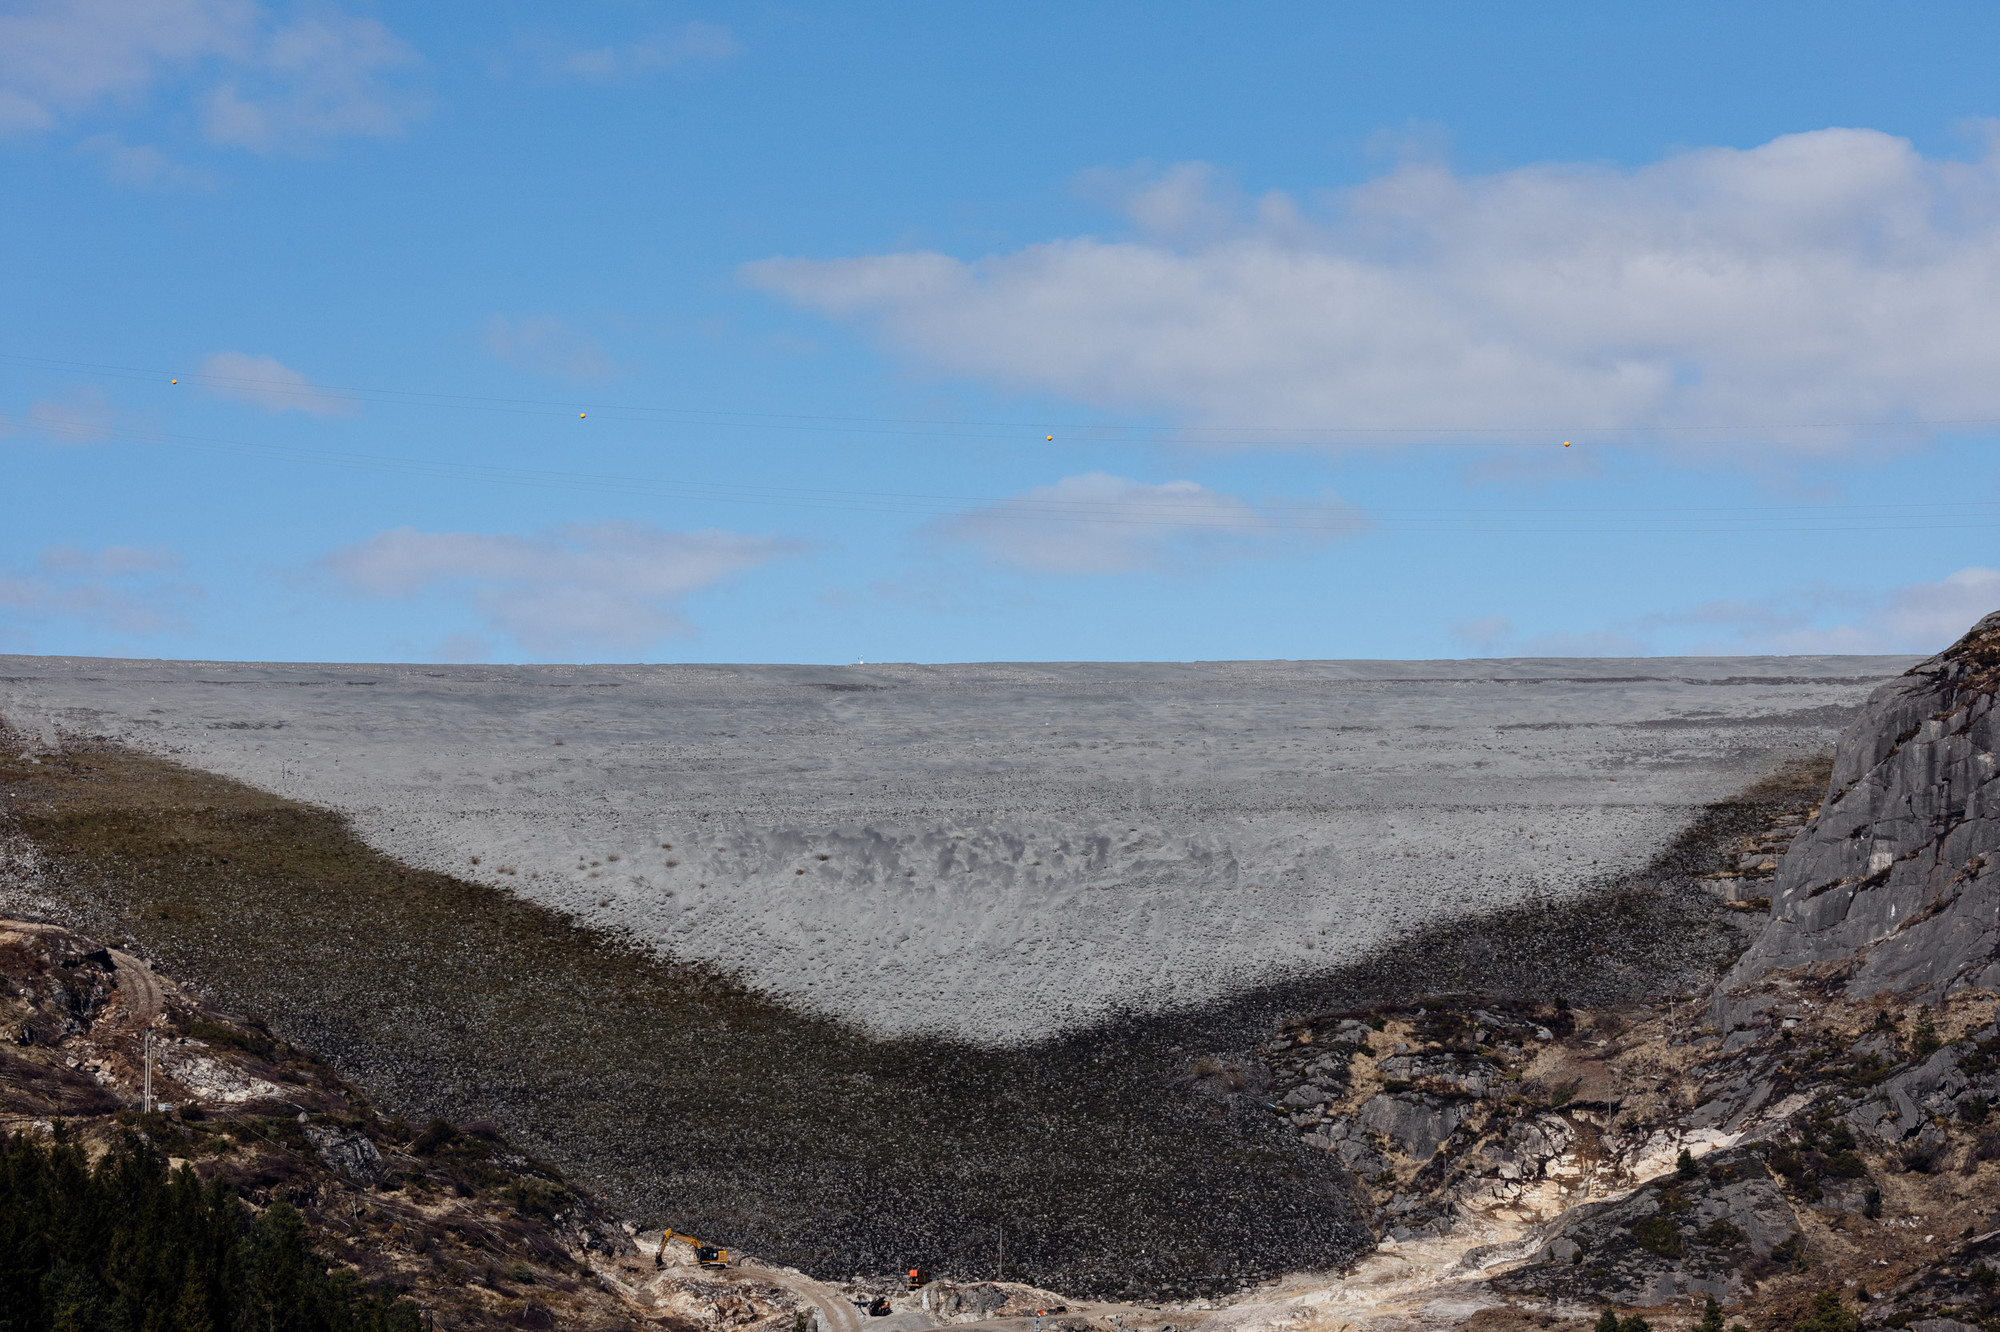 A landscape image of a large grey mine and a bright blue sky with a few clouds.